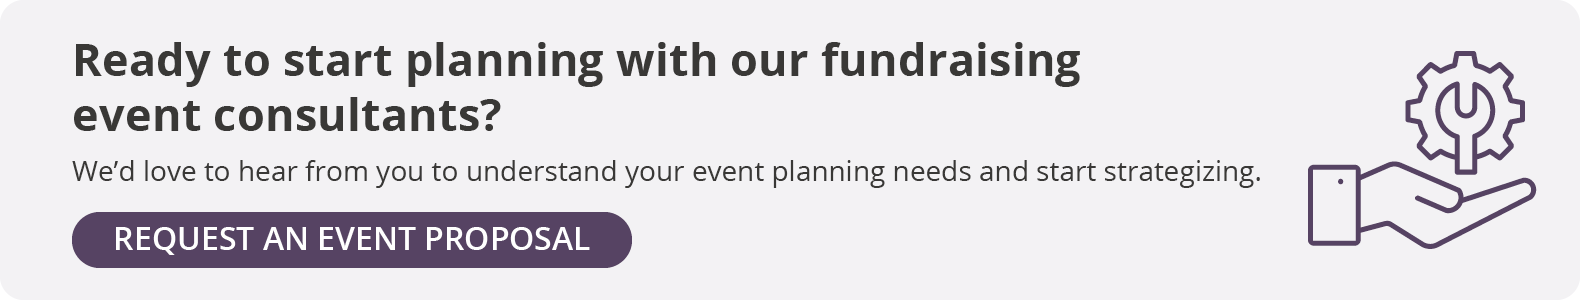 Click through to request an event proposal from expert fundraising event consultants at Swaim Strategies.